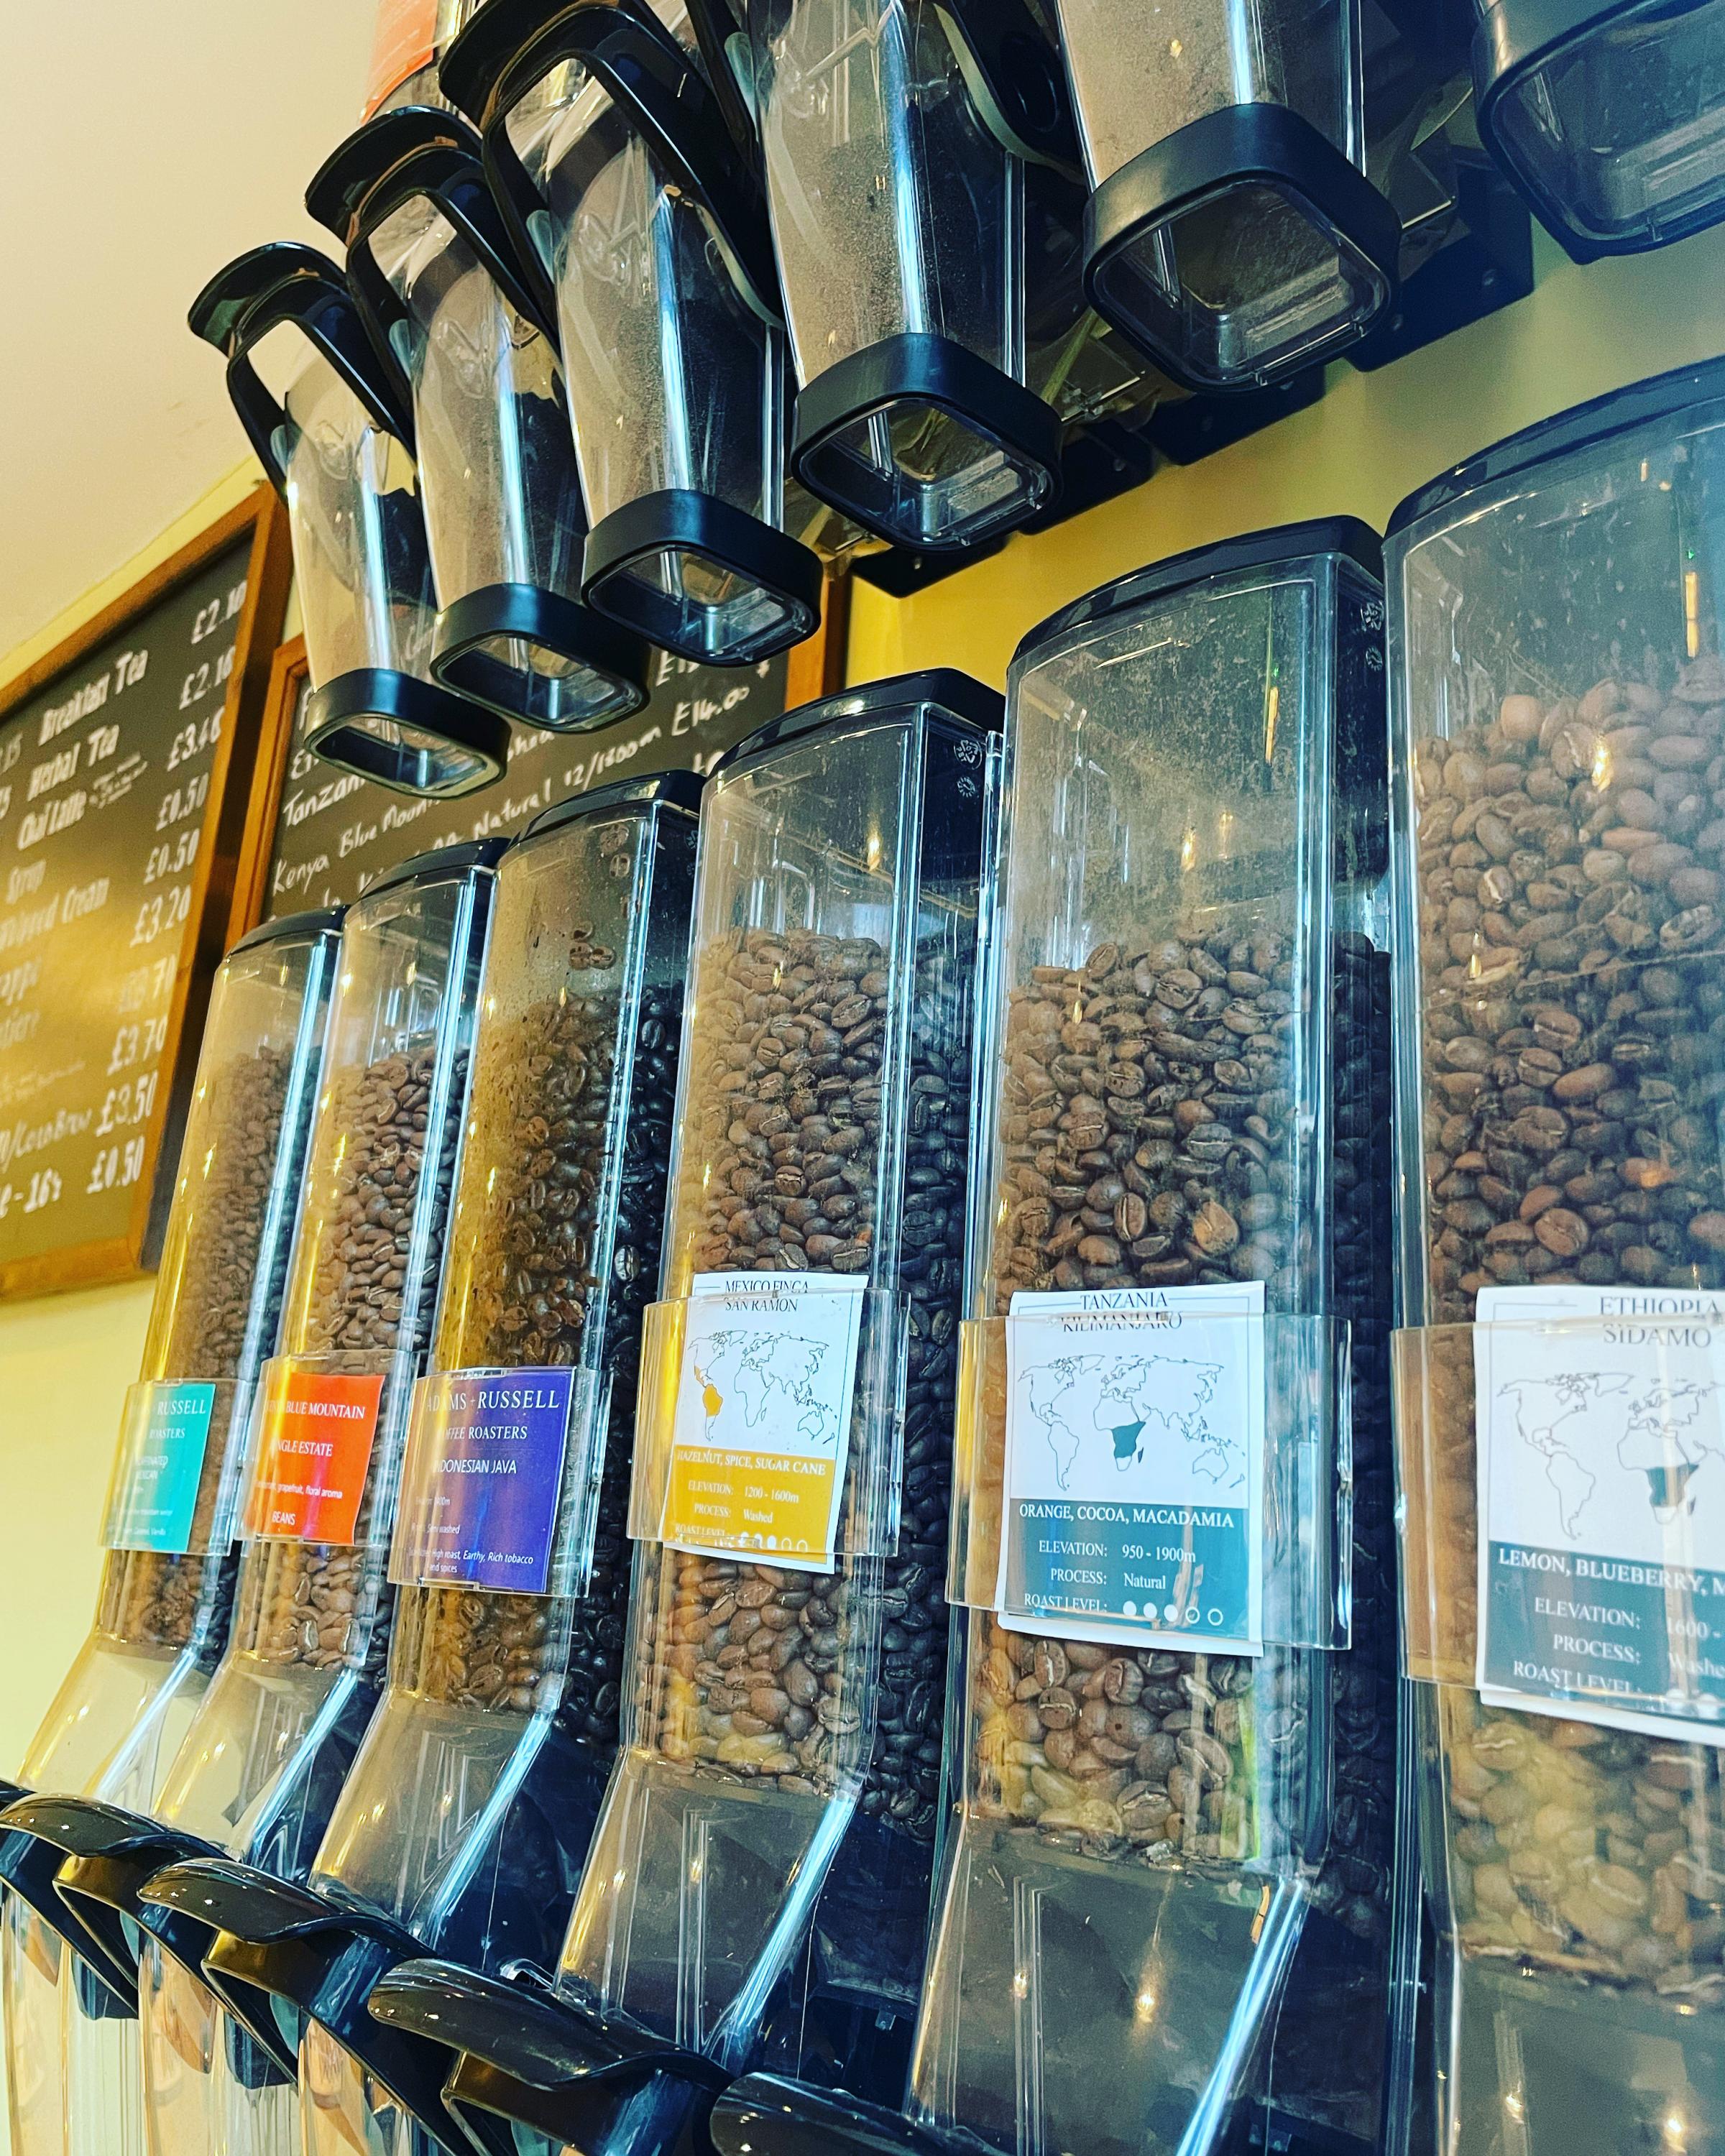 Dicks Bean Bar provides more than a dozen different hand roasted quality coffee beans at any one time